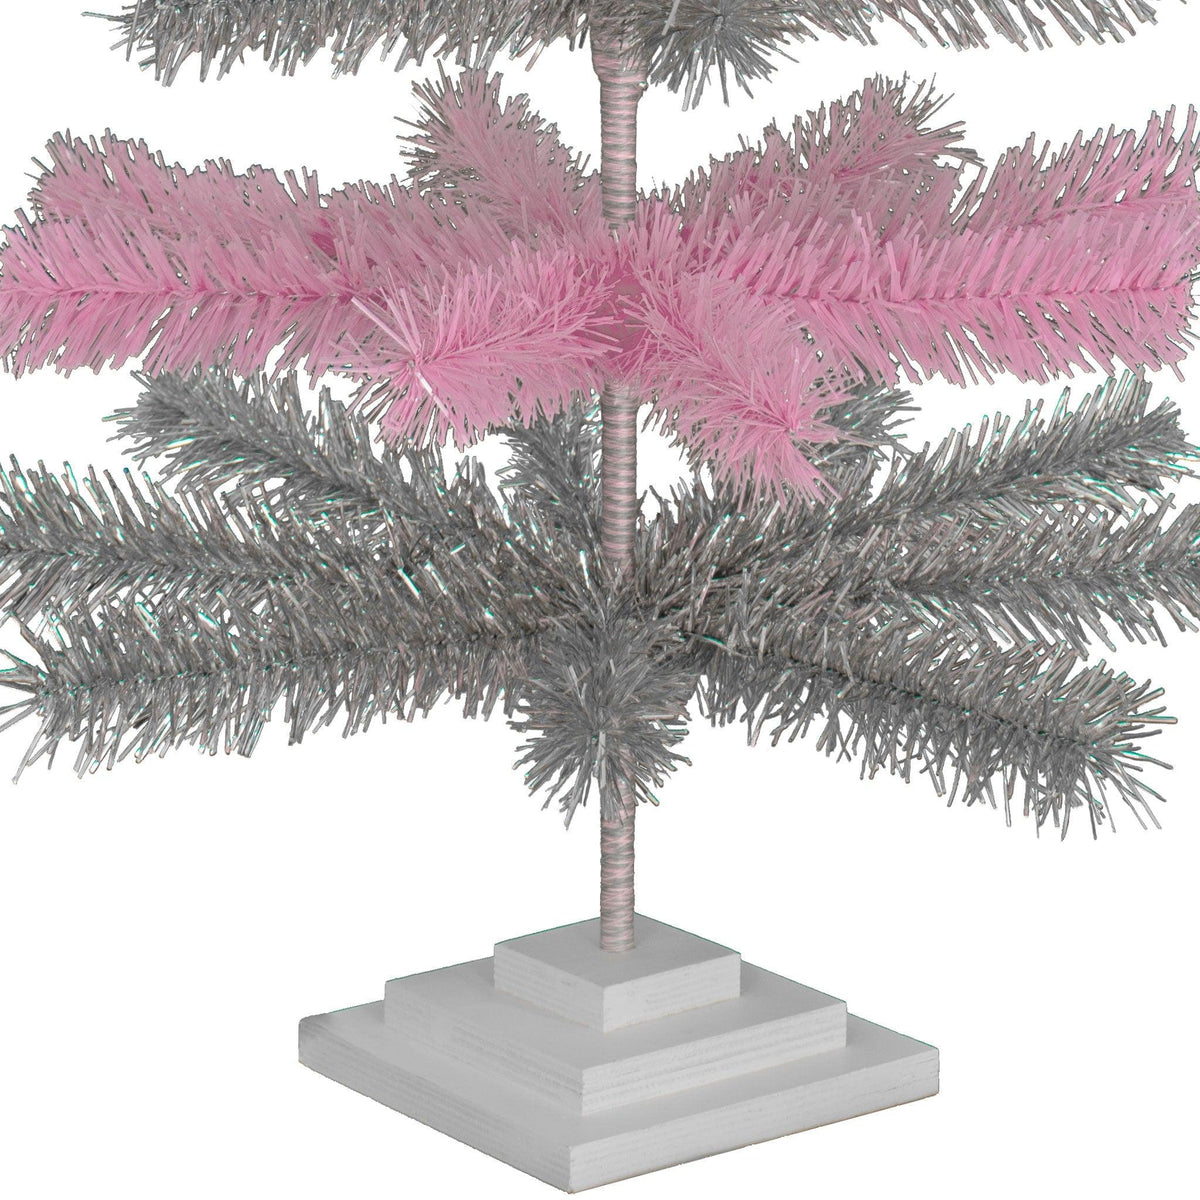 48in tall Pink & Silver Layered Tinsel Christmas Trees made by hand in the USA on sale at leedisplay.com